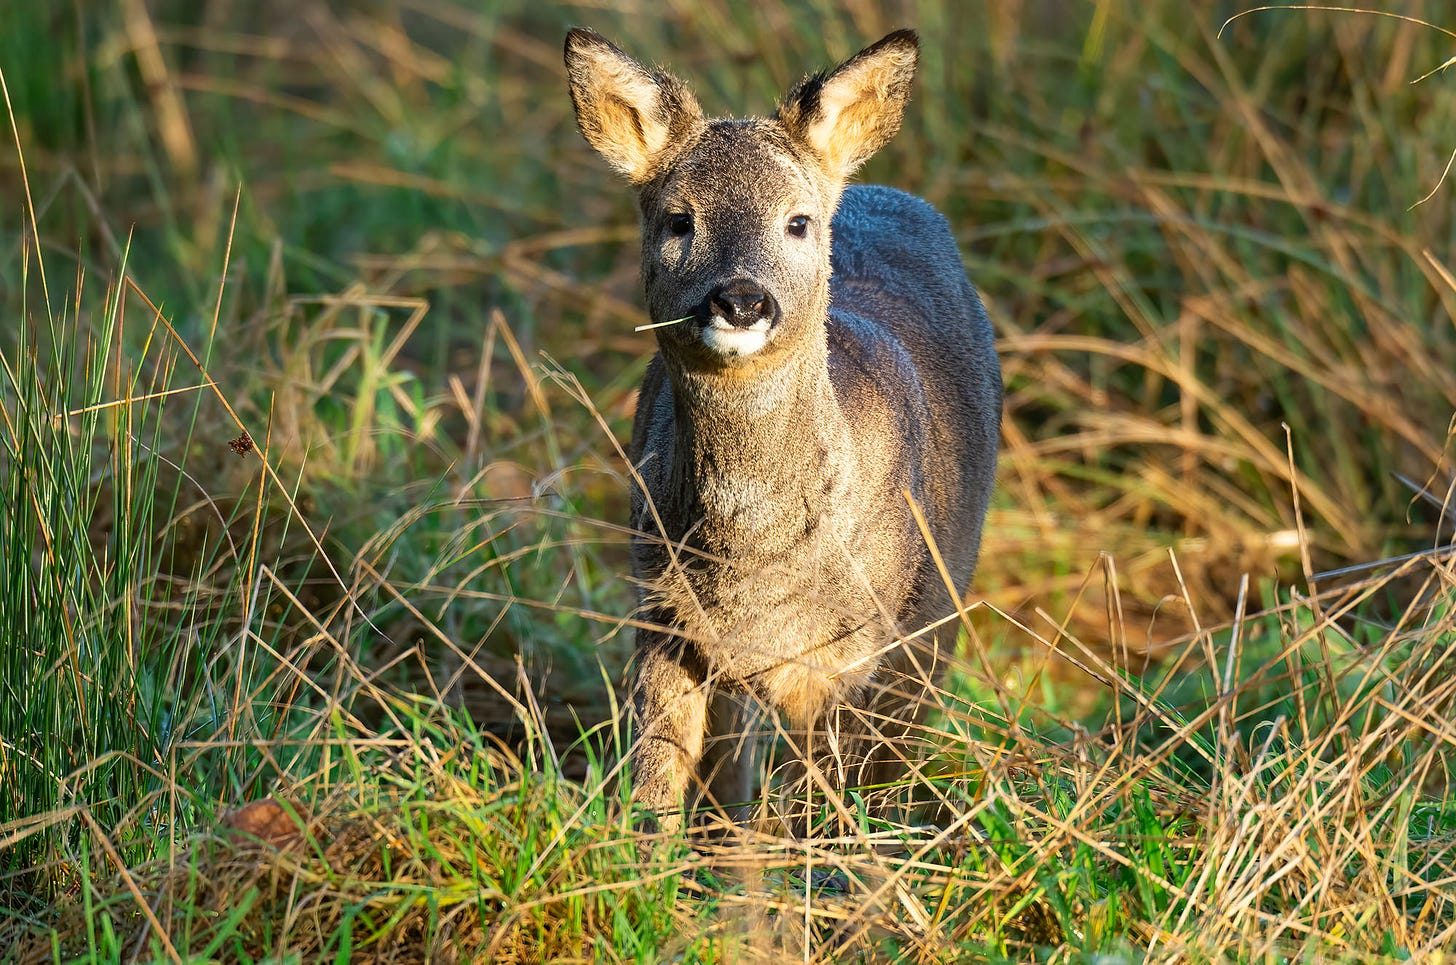 Photo of a young row deer standing in long grass